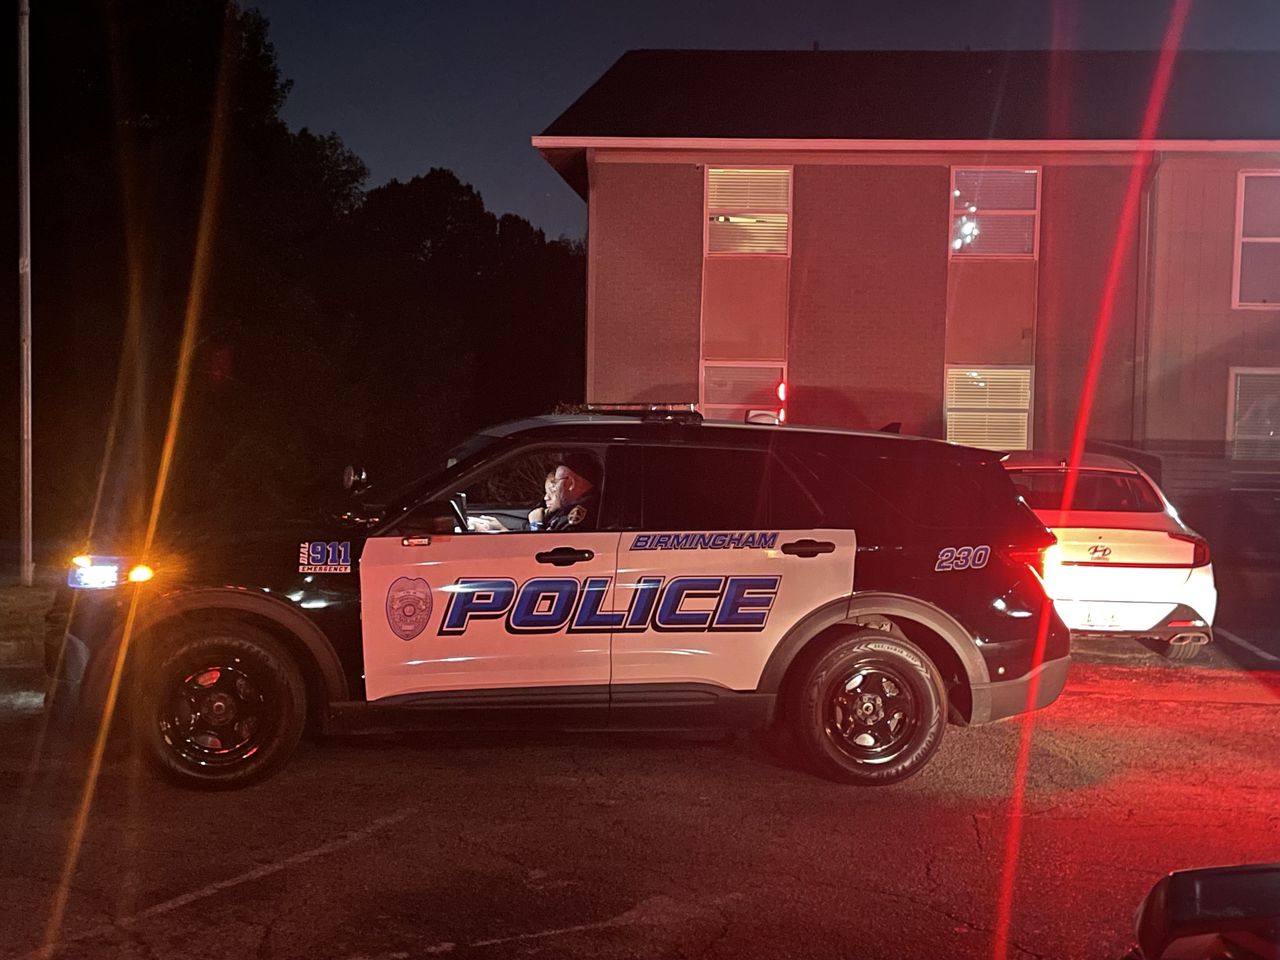 17-year-old boy critically wounded in Birmingham drive-by shooting: Police